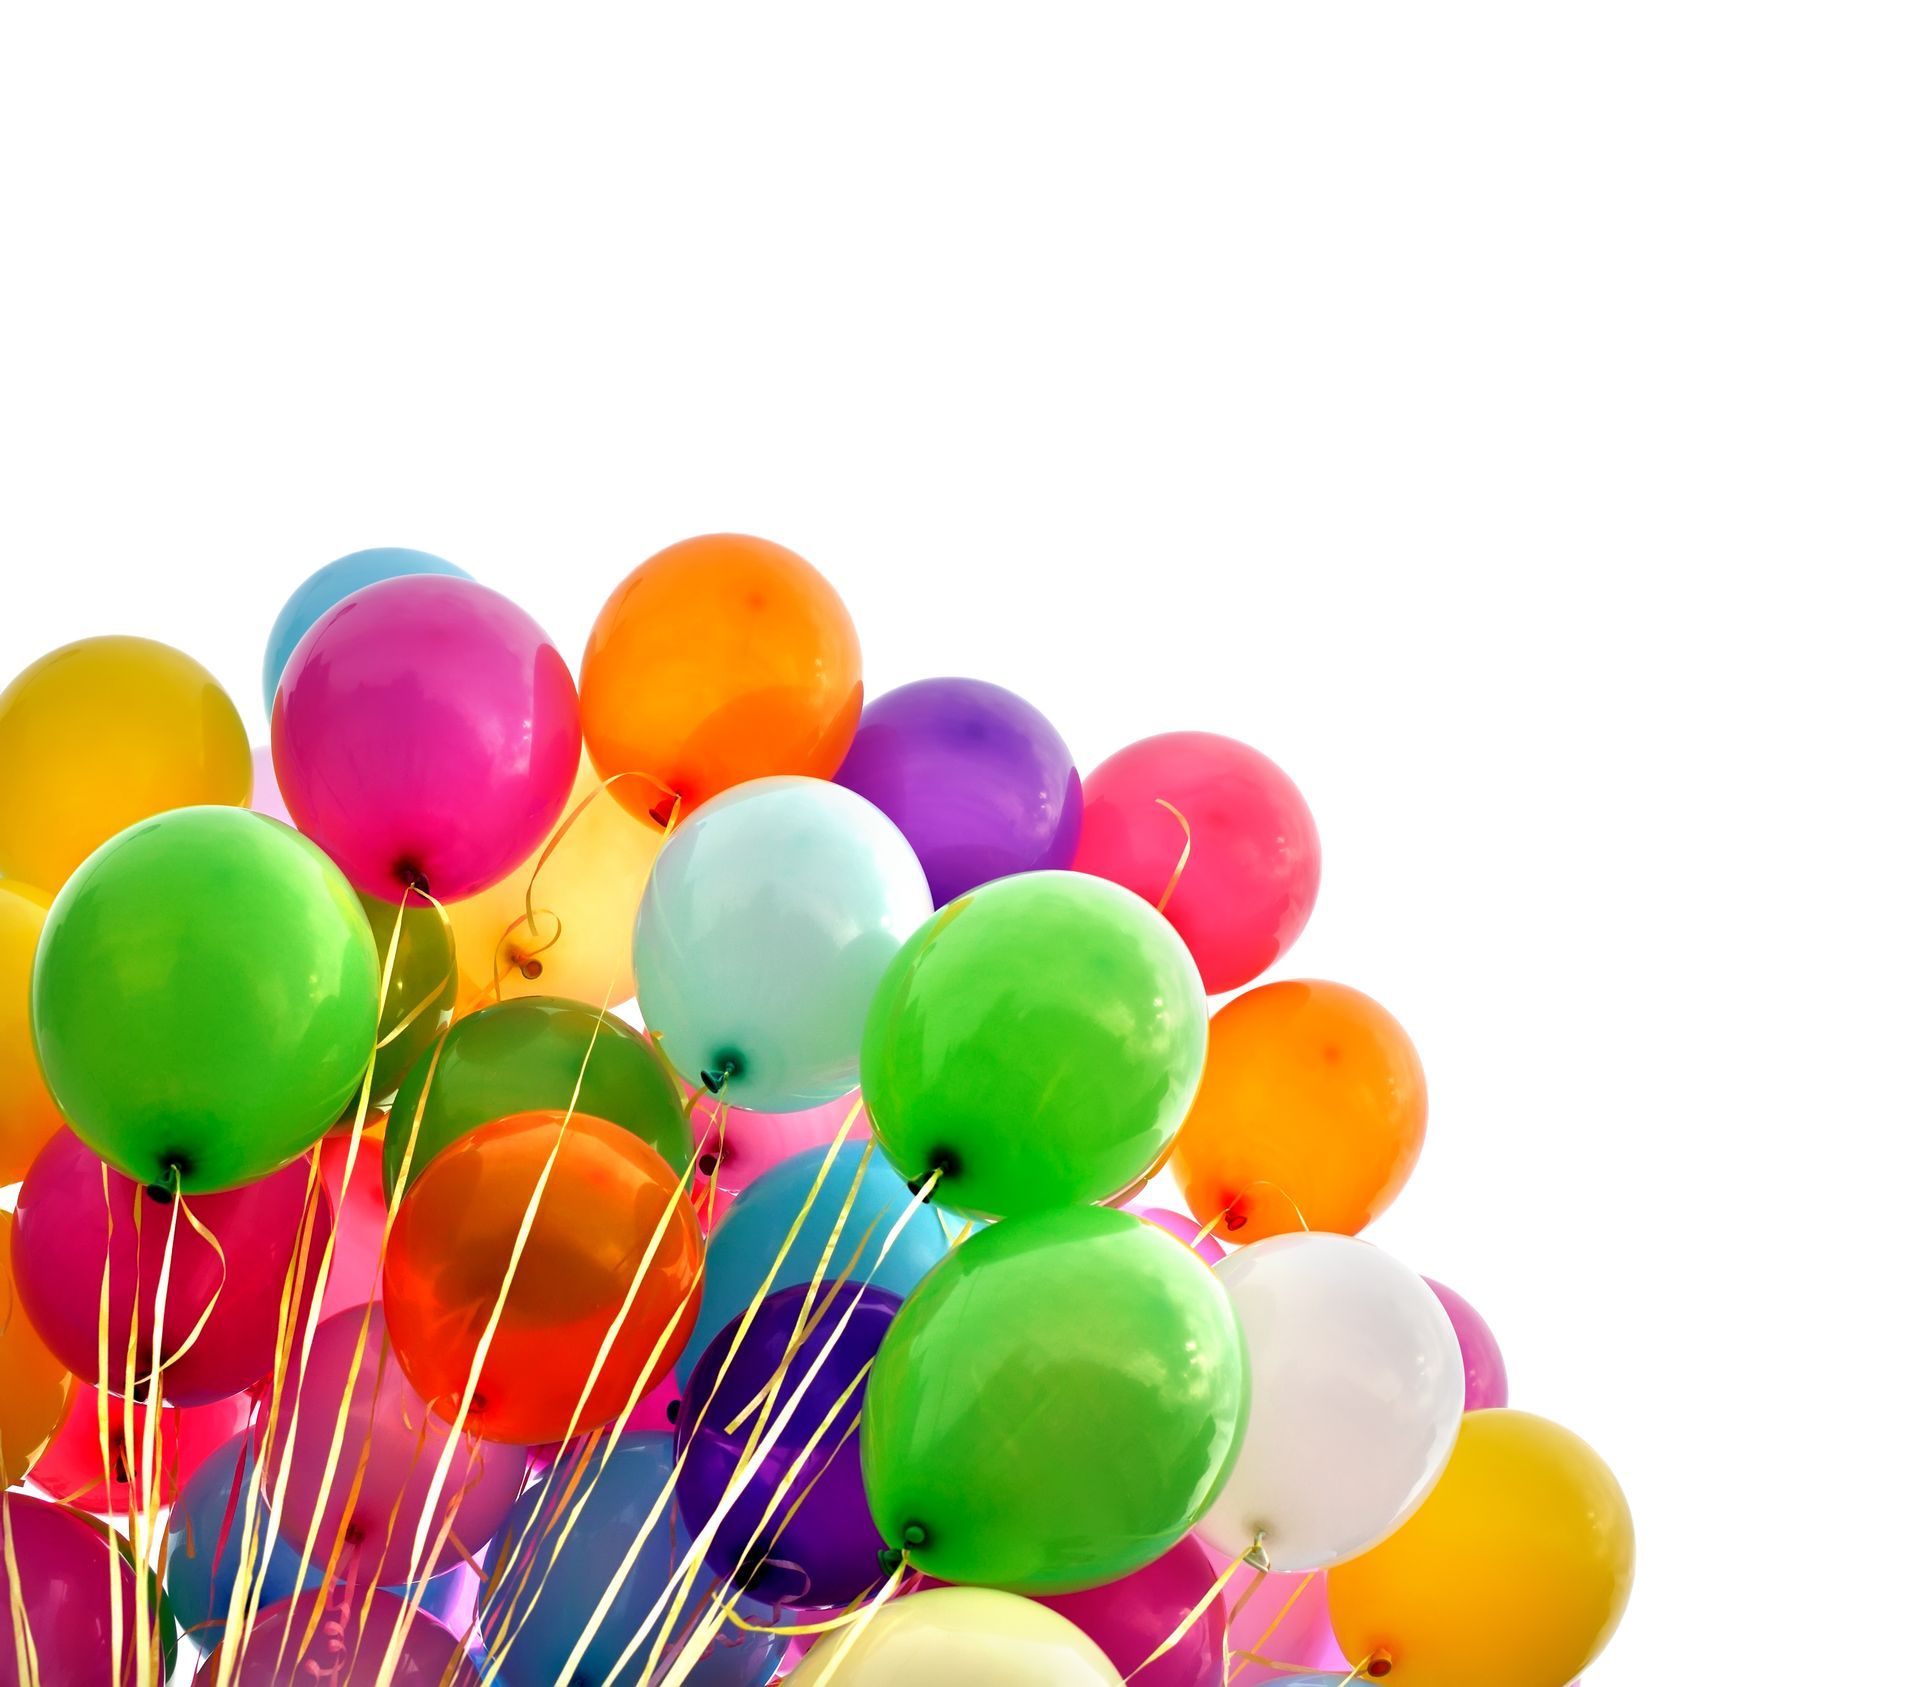 A bunch of colorful balloons on a white background